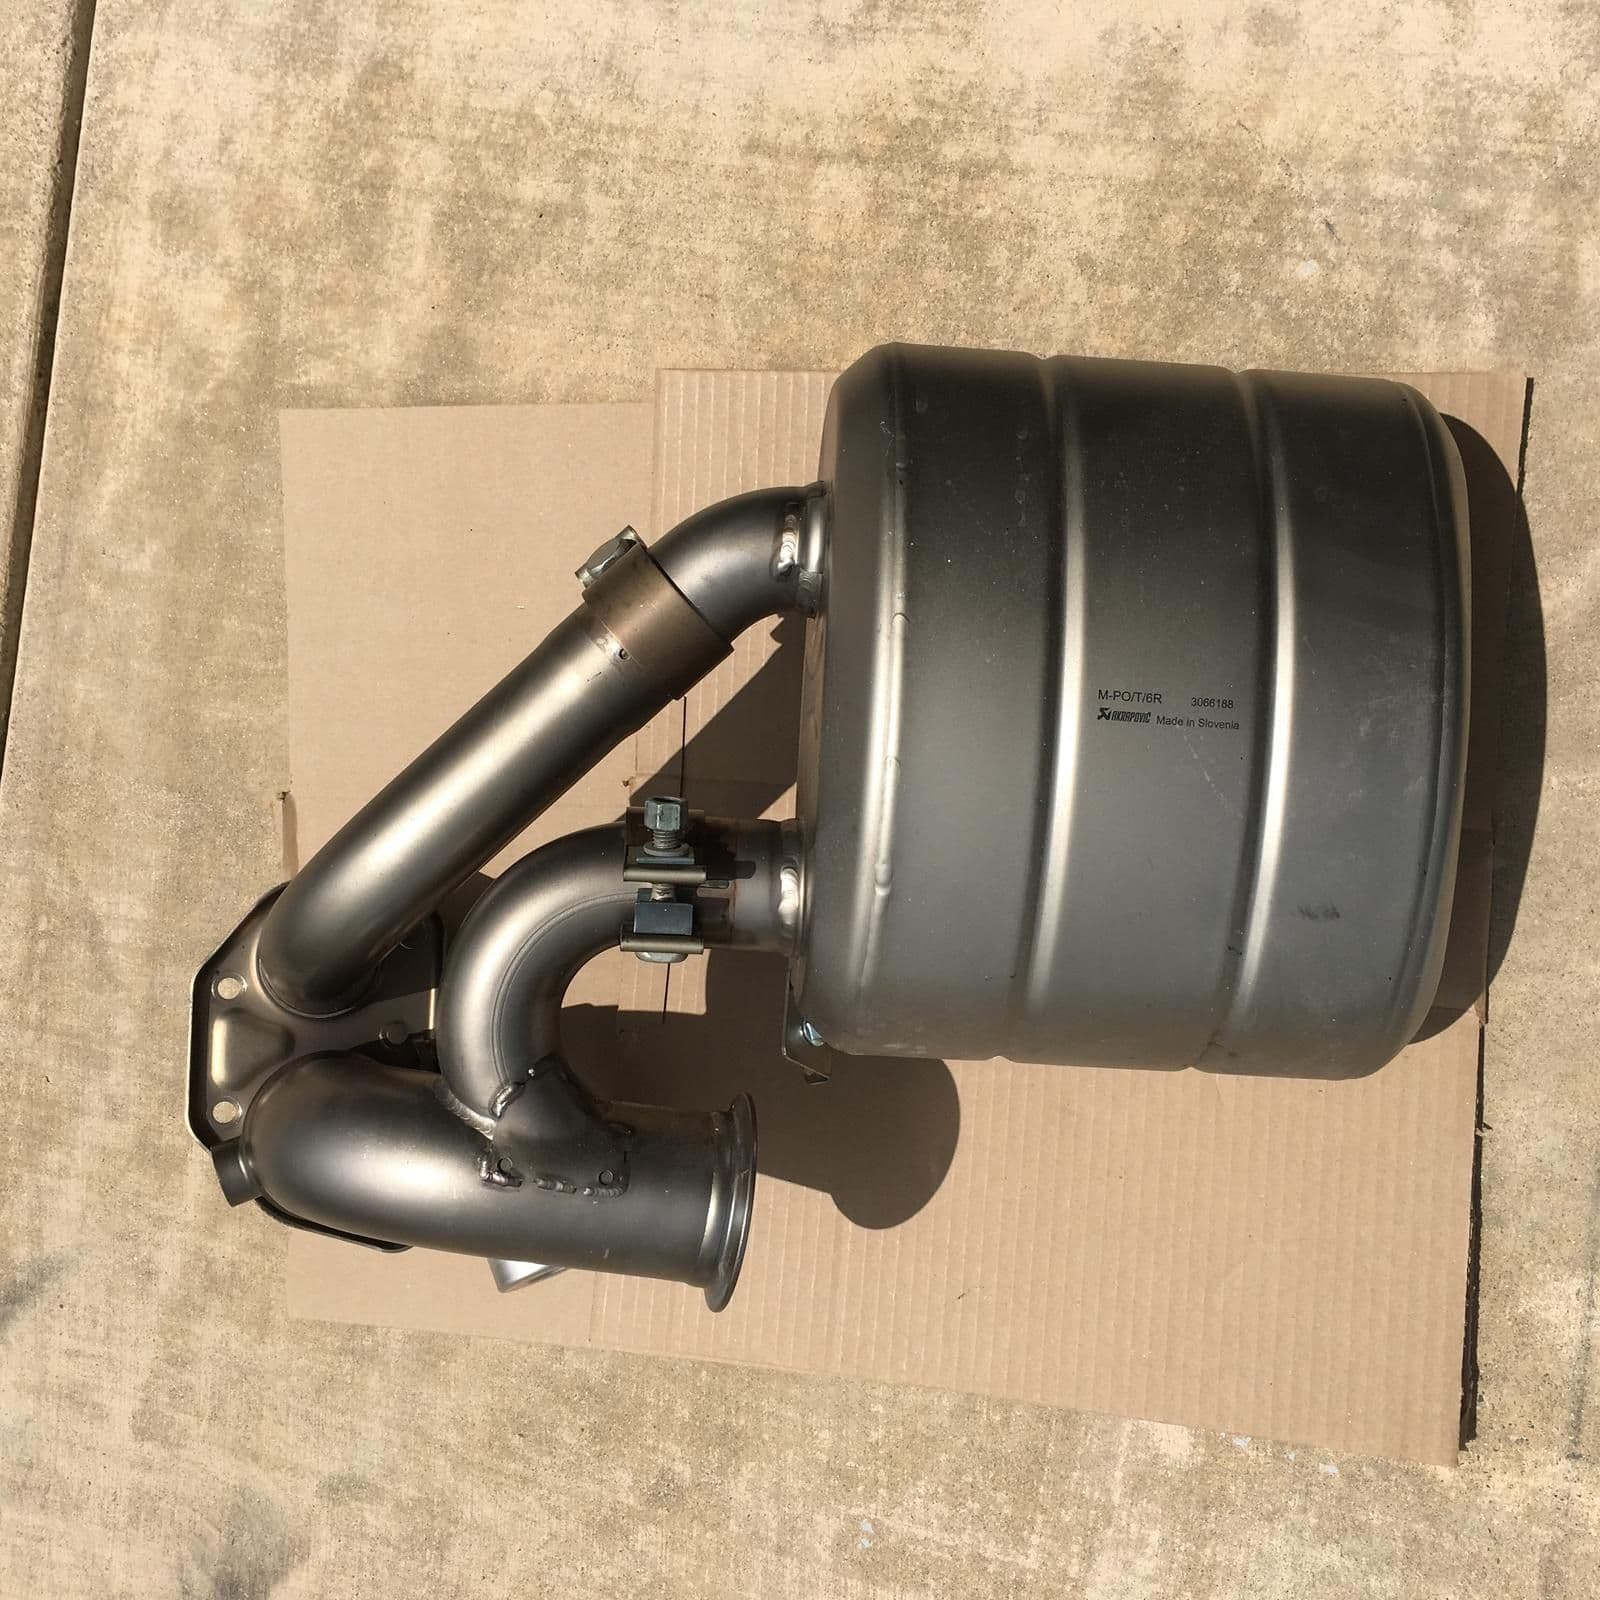 Engine - Exhaust - FS: 991 GT3 Akrapovic Evolution Exhaust System - Used - 2014 to 2016 Porsche 911 - Los Angeles, CA 90024, United States